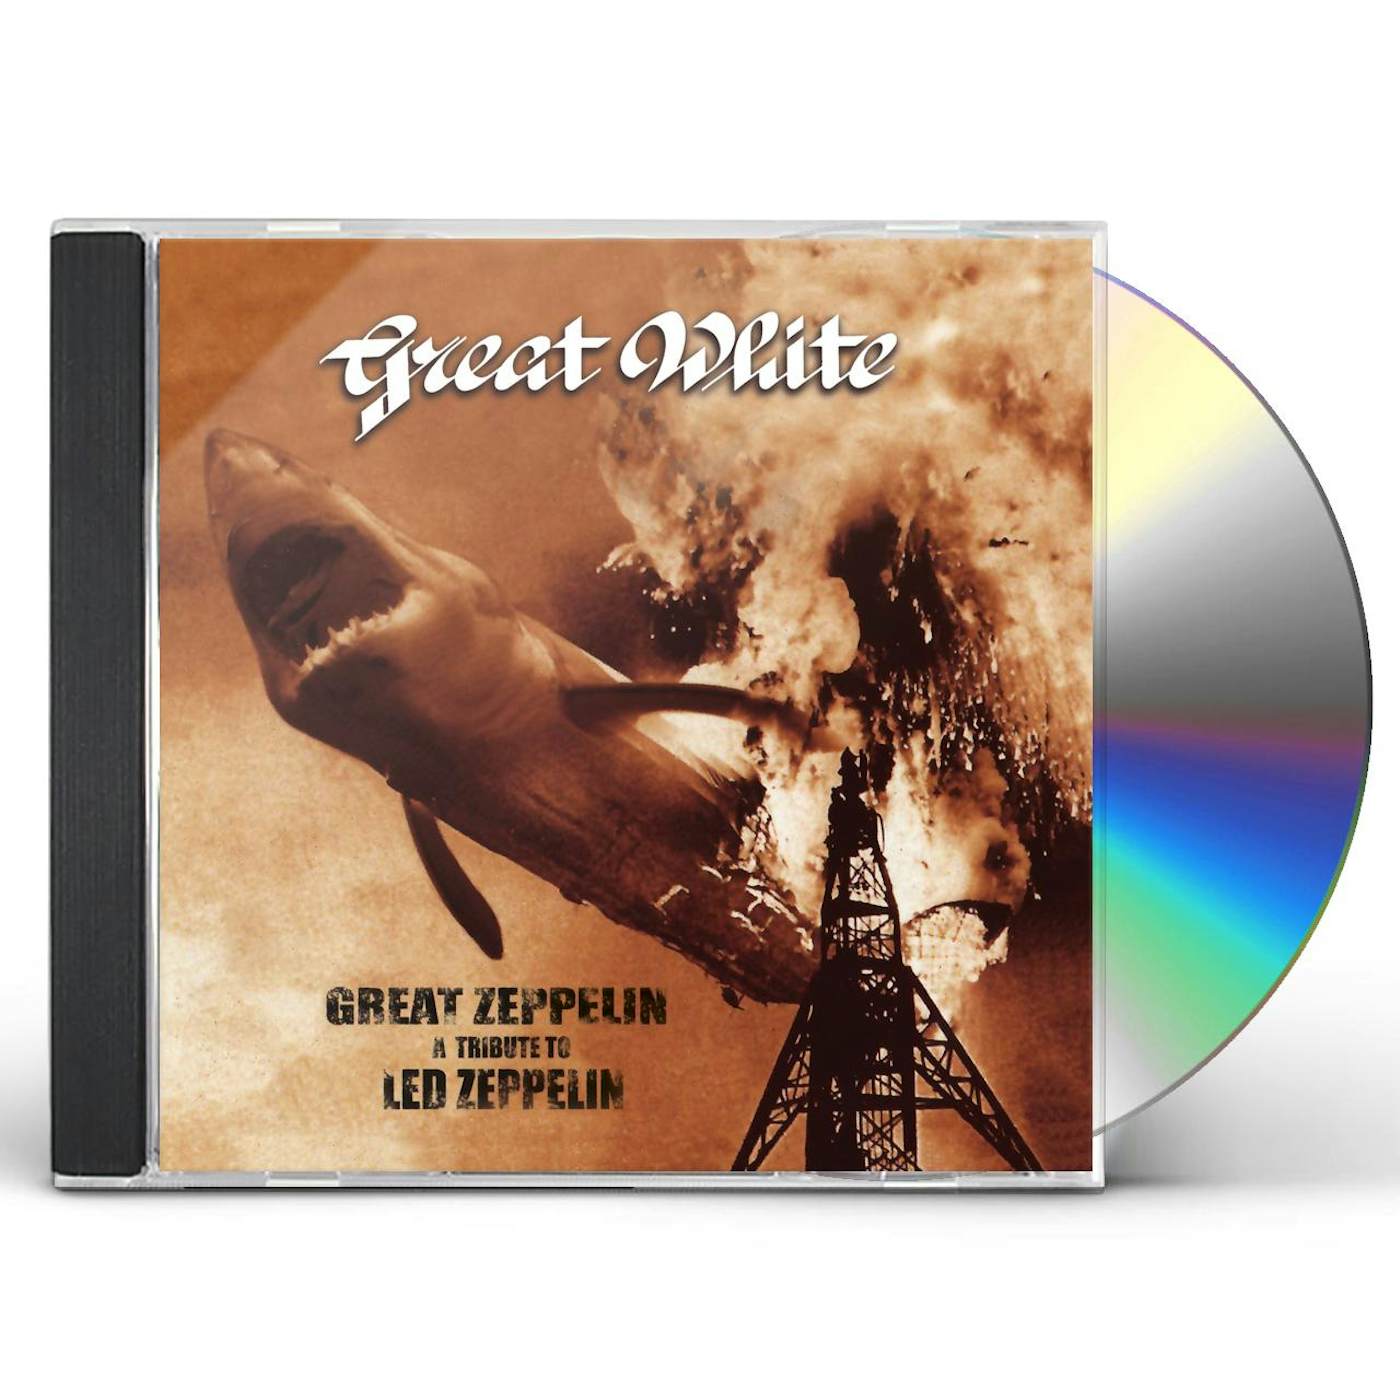 Great White GREAT ZEPPELIN - A TRIBUTE TO LED ZEPPELIN CD